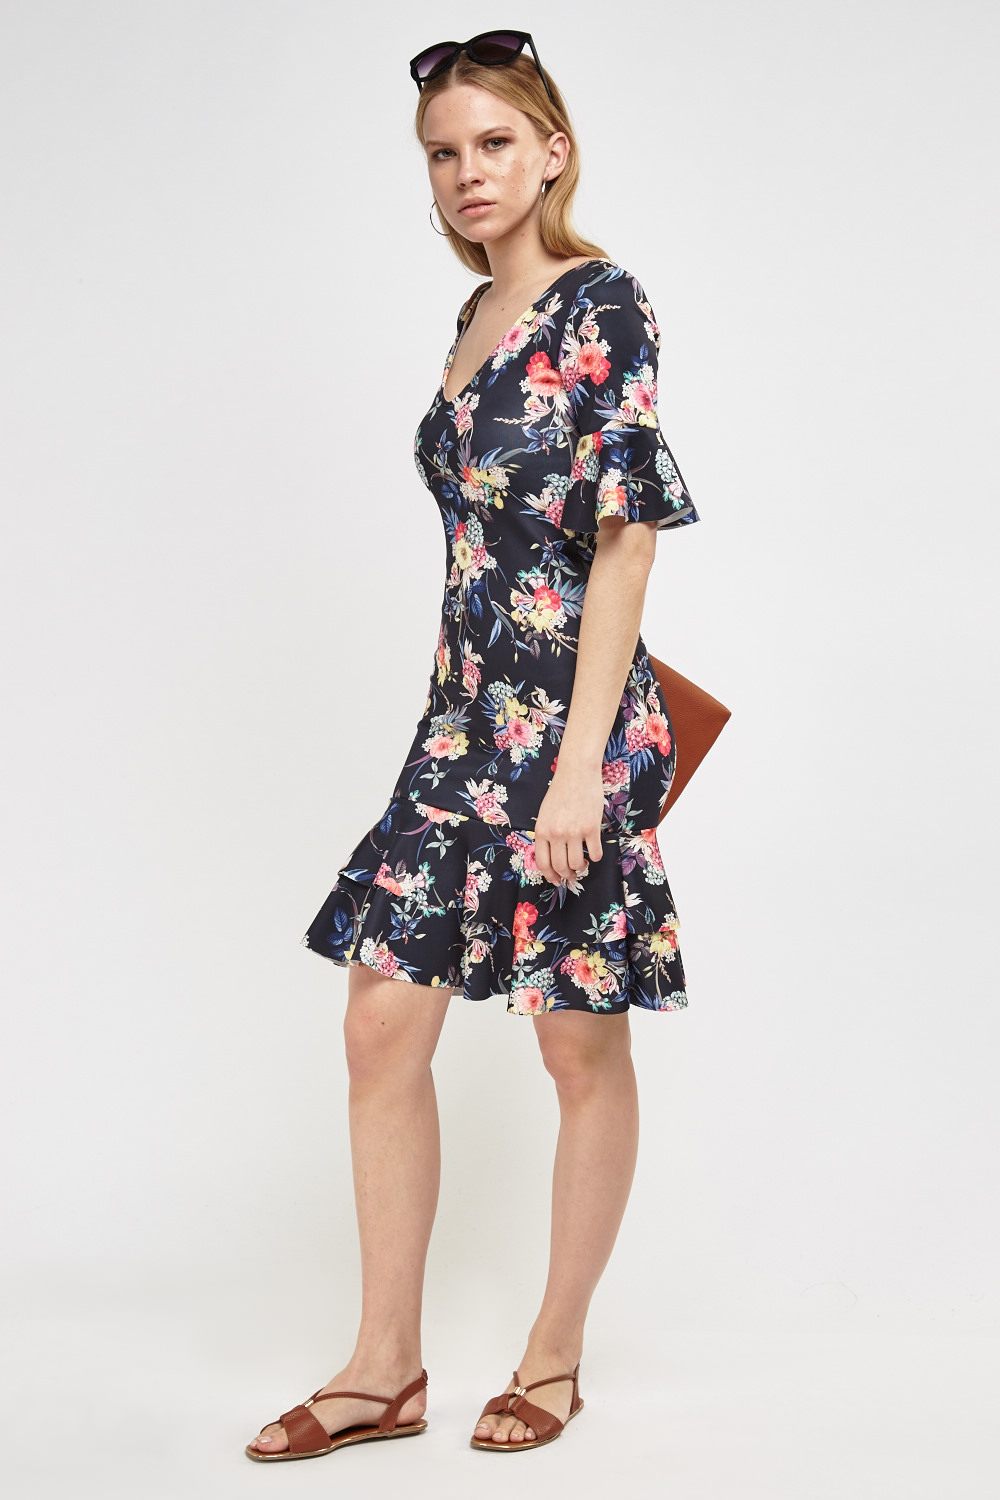 Floral Printed Tiered Dress - Just $3